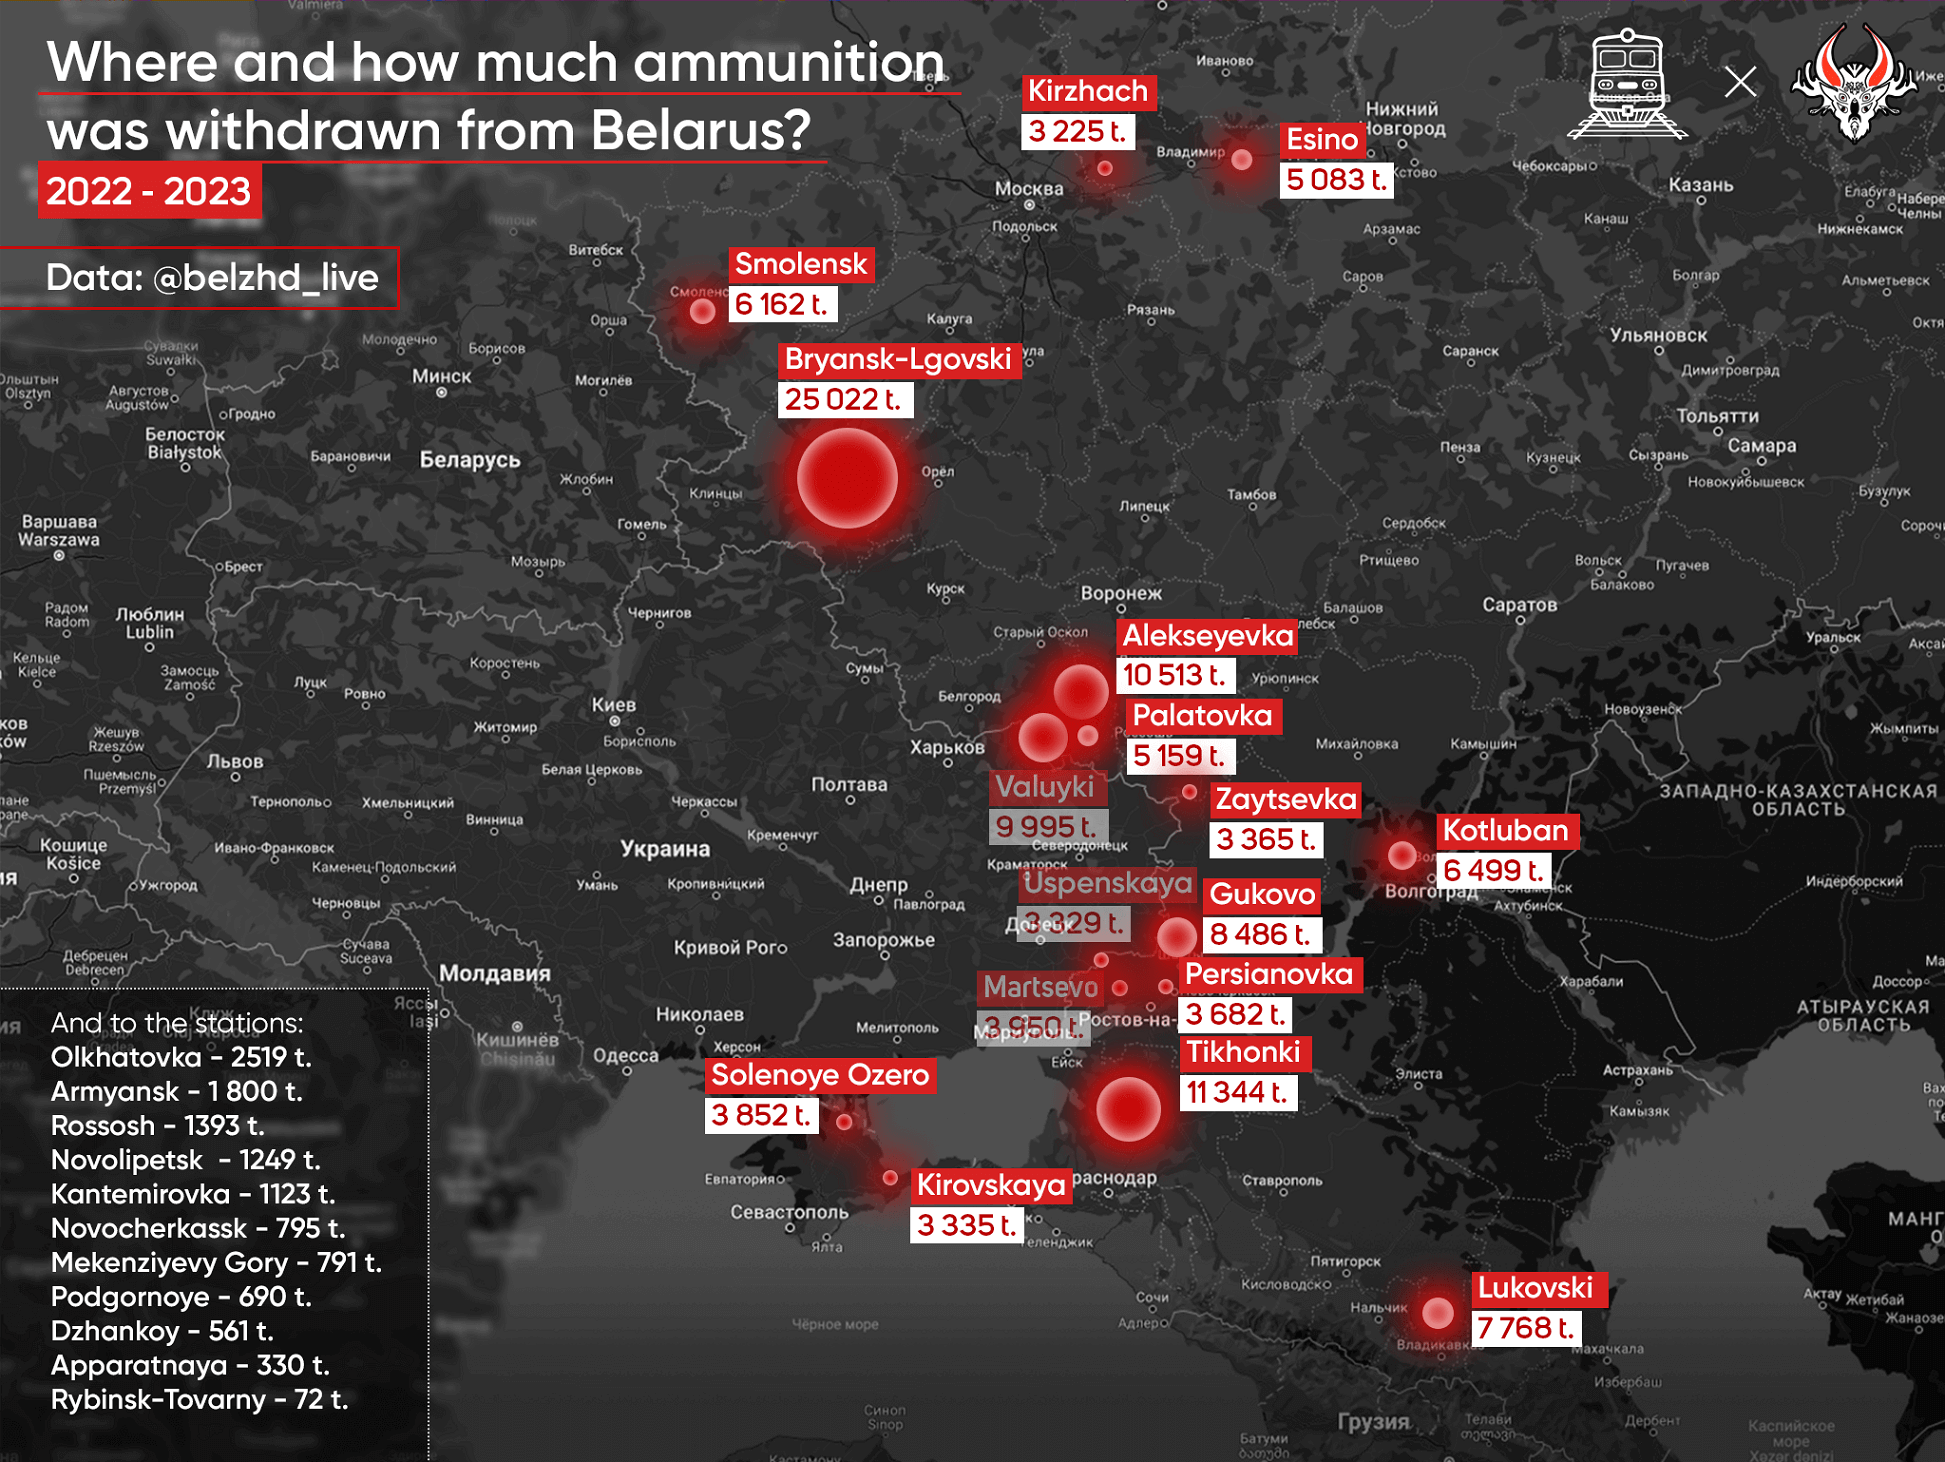 Where and how much ammunition was withdrawn from Belarus?